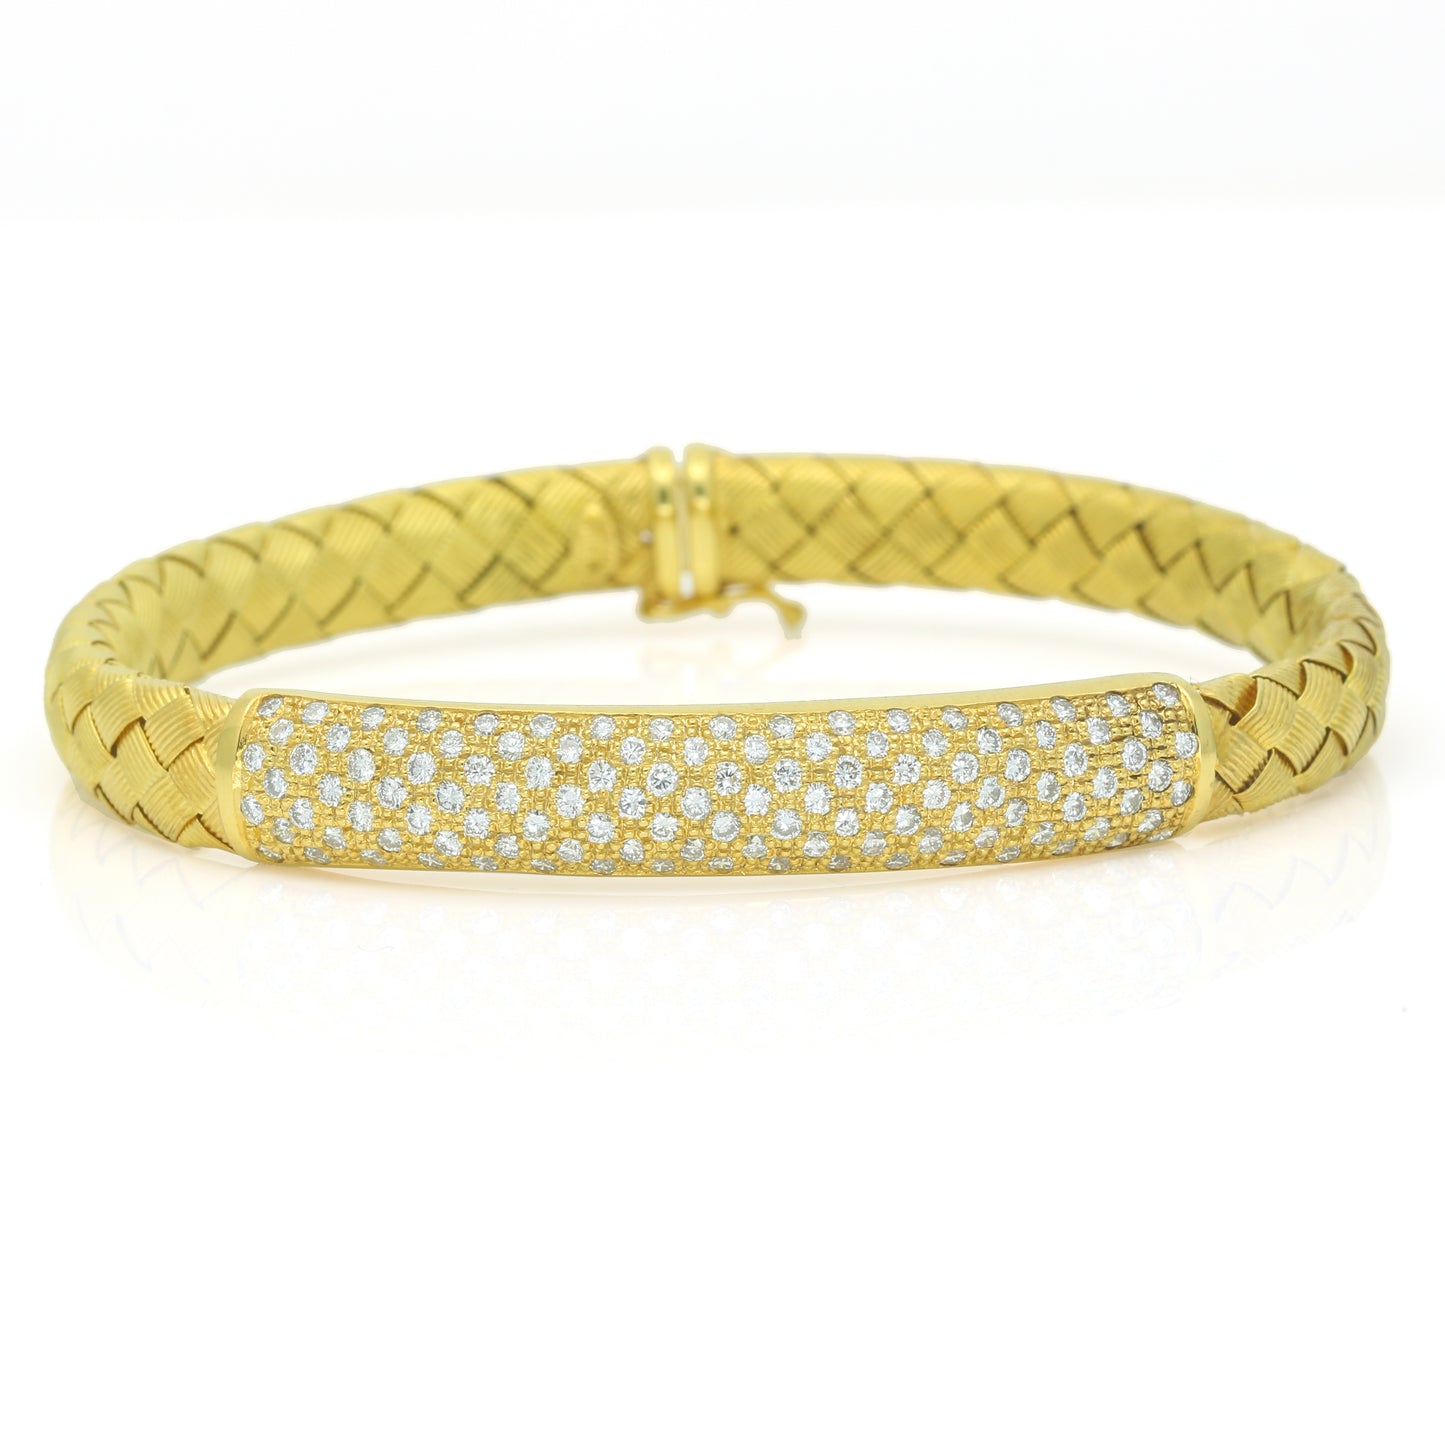 Pave Diamond ID Ruby Woven Bracelet in 18k Yellow Gold Size Large